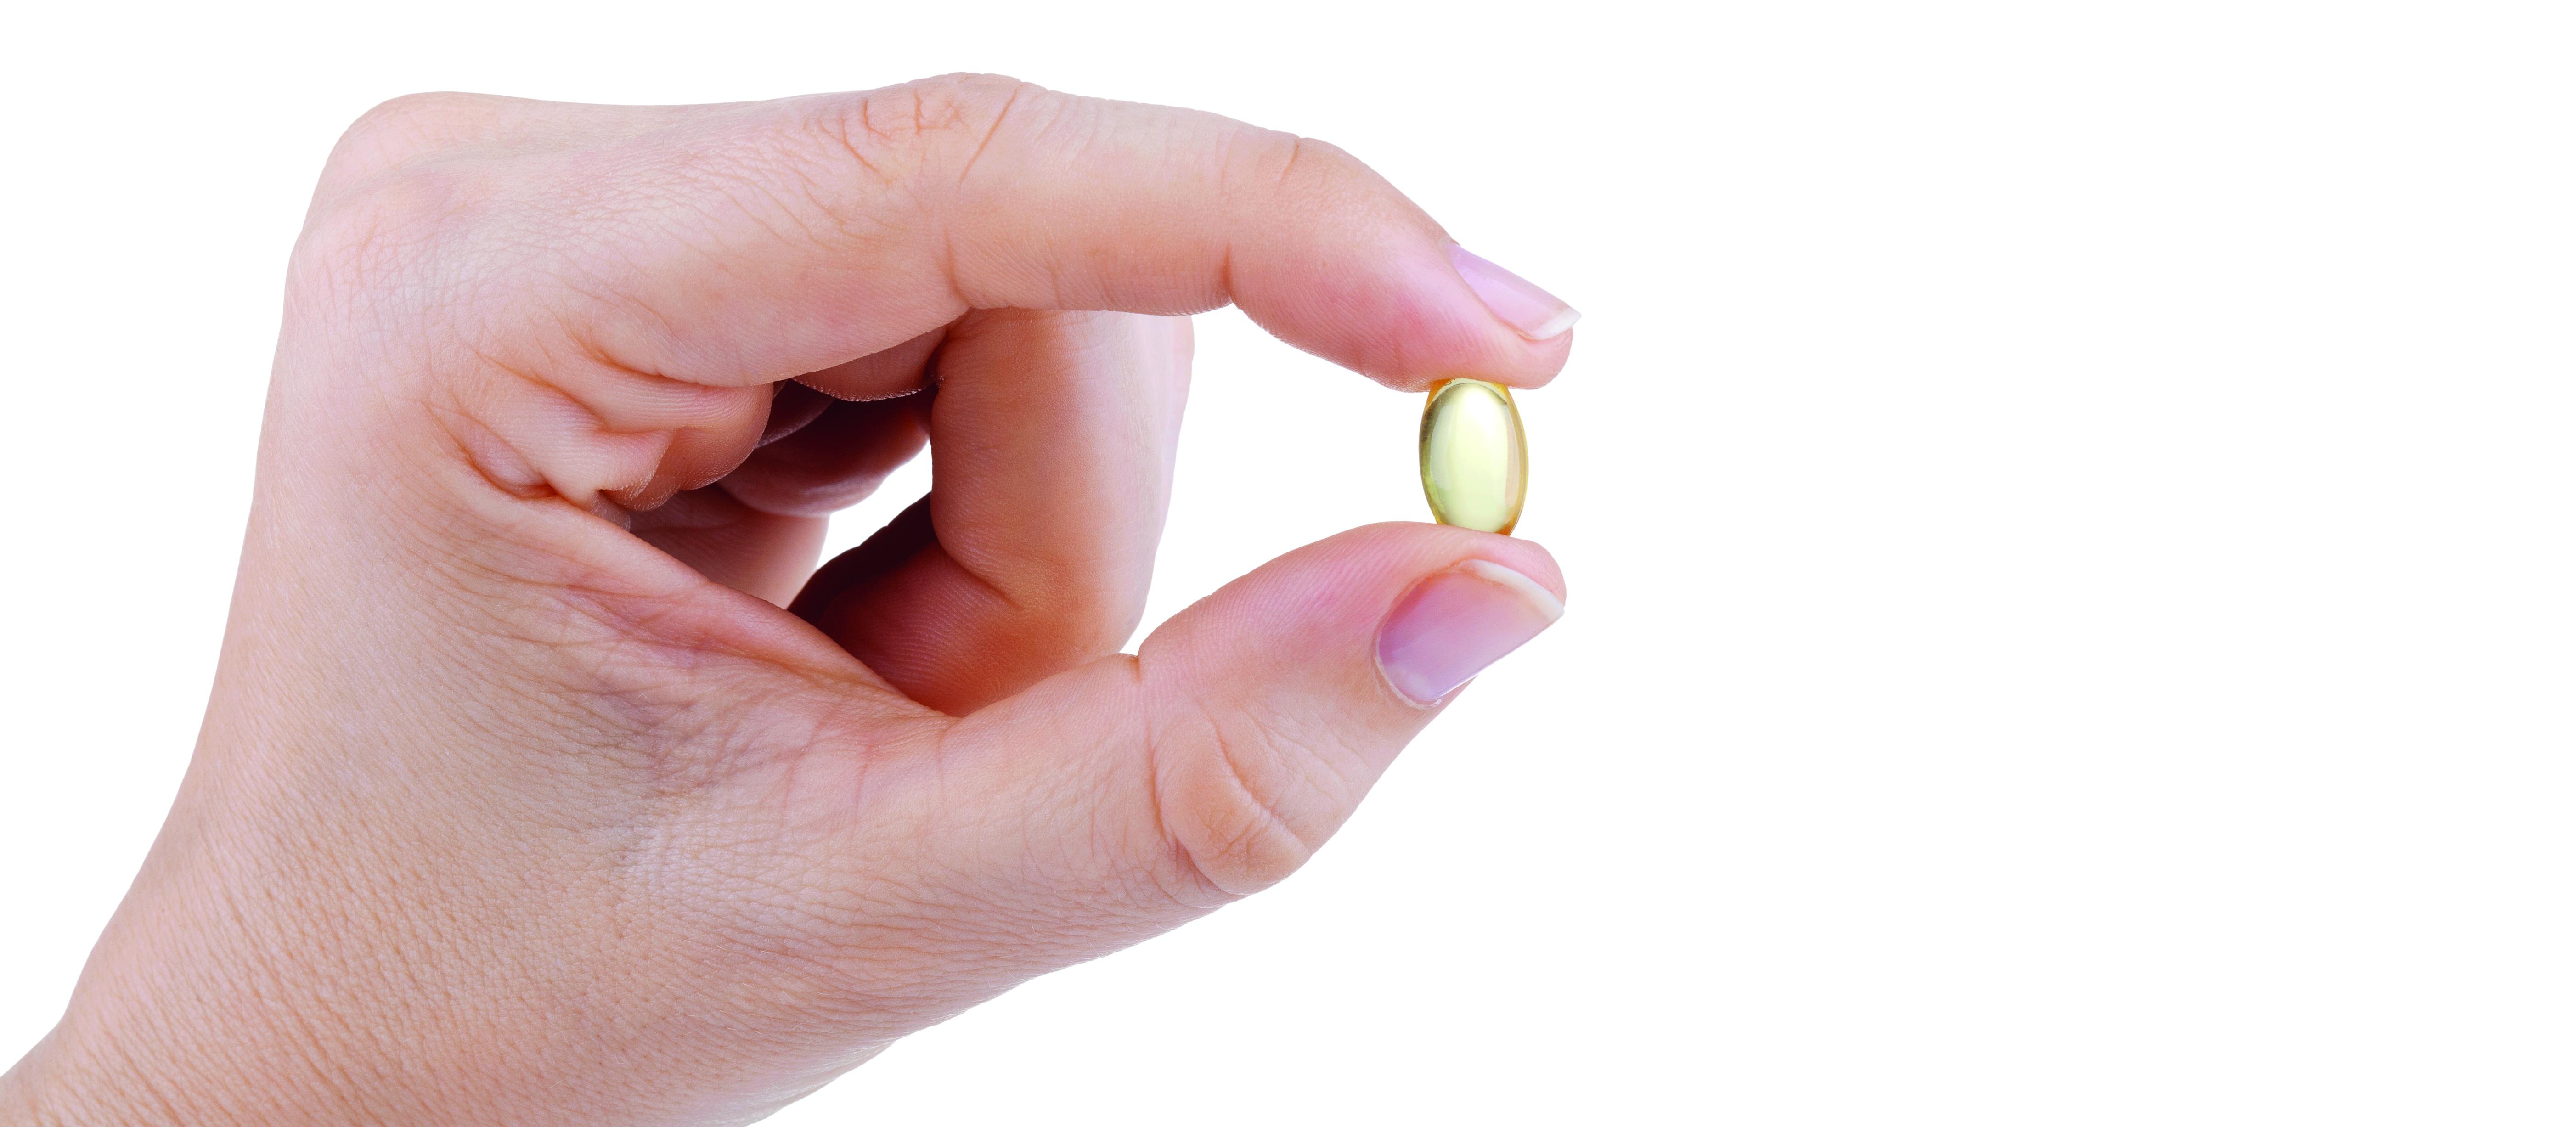 Hand holding fish oil supplement